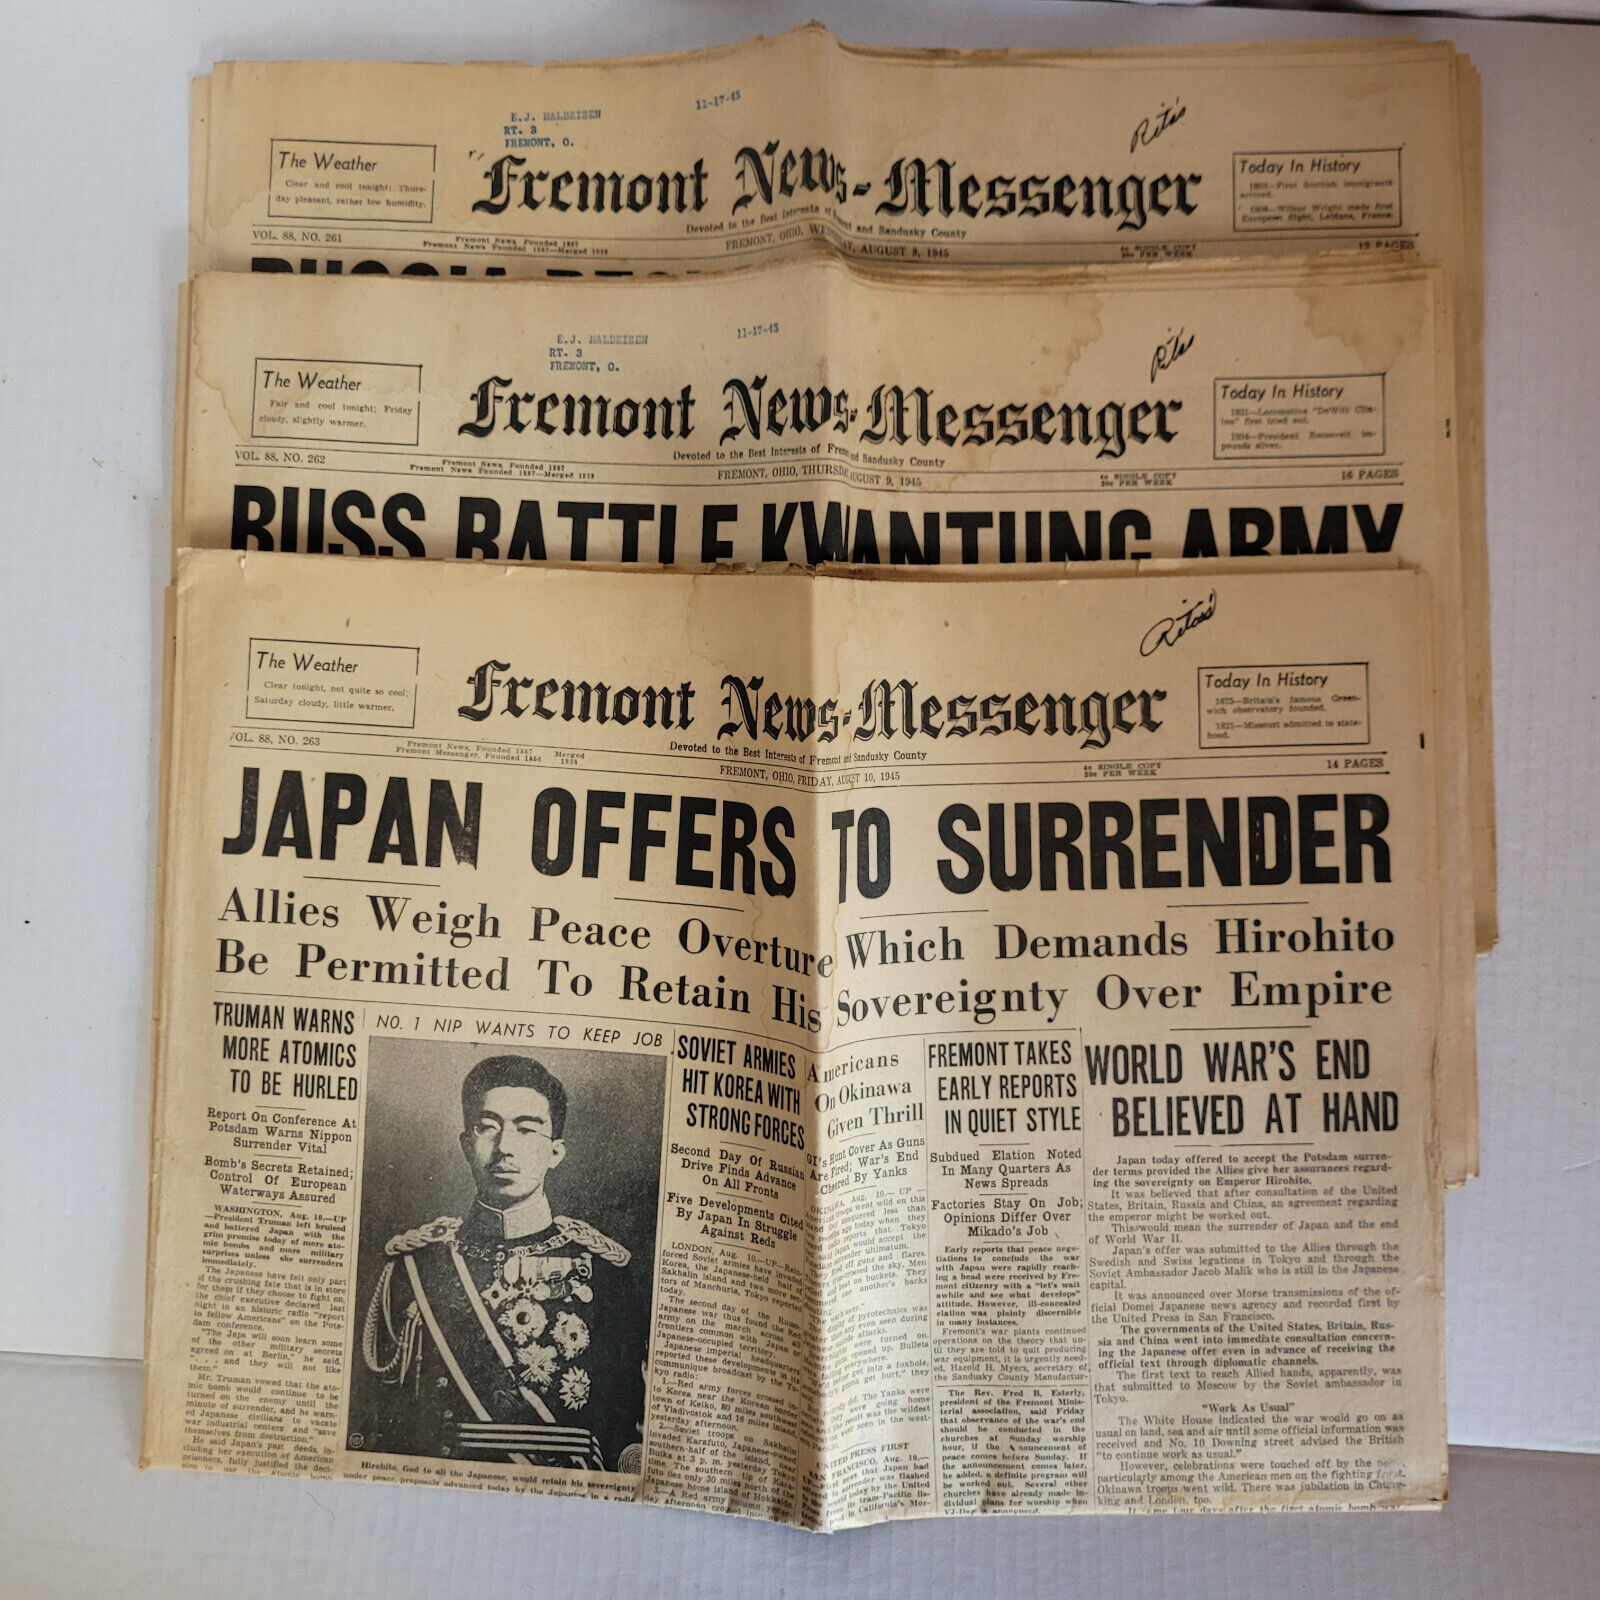 WWII August 8, 9, 10 FREMONT NEWS MESSENGER 1st Sections Atomic Bombs, Surrender